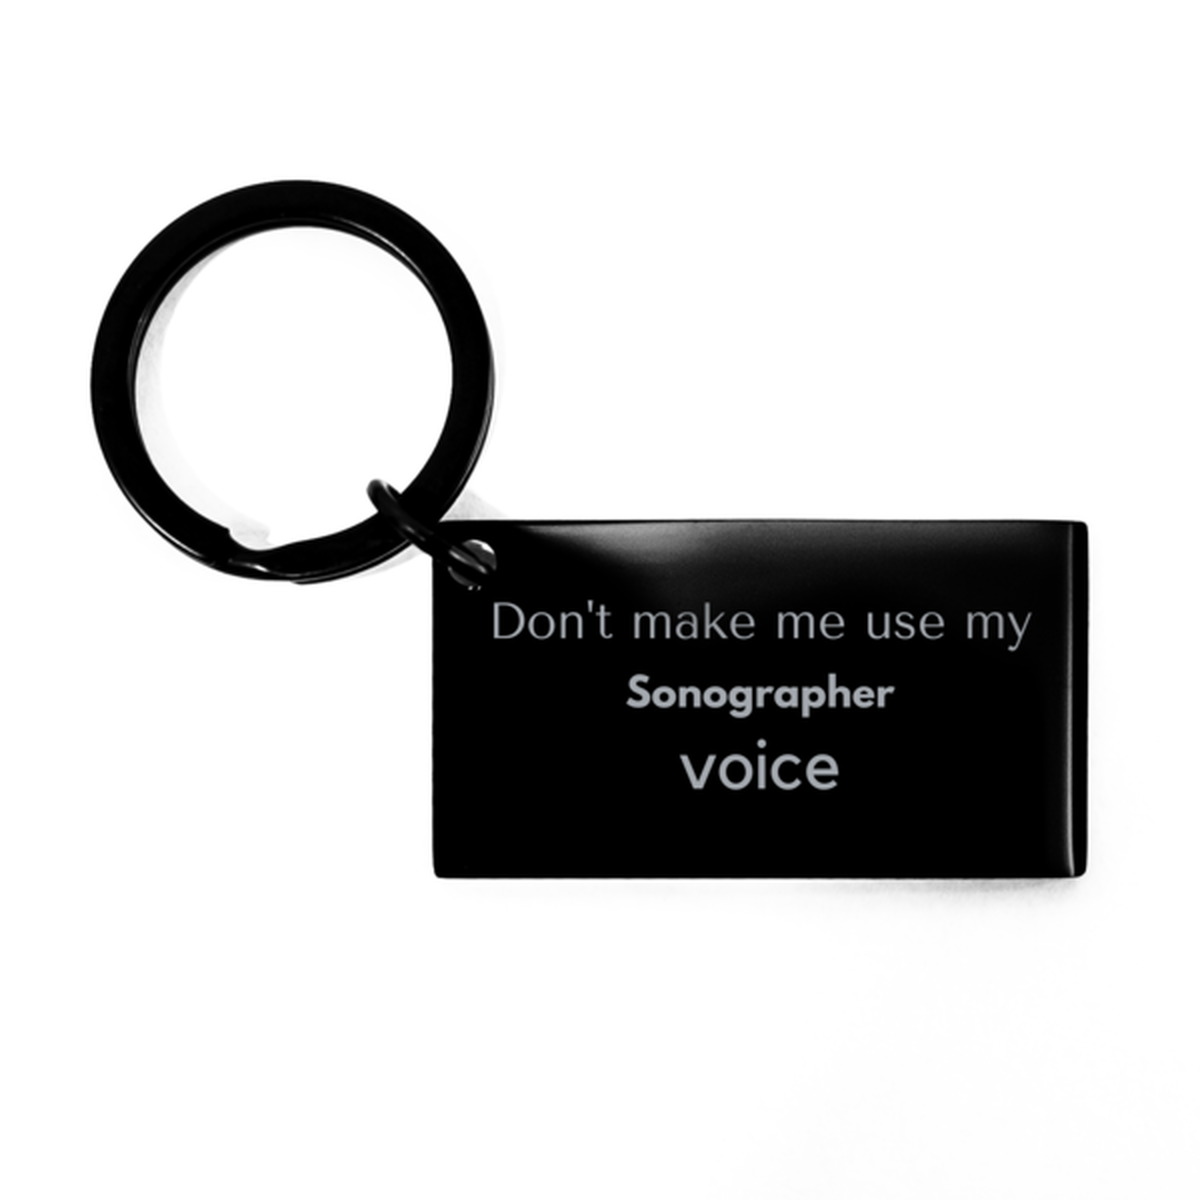 Don't make me use my Sonographer voice, Sarcasm Sonographer Gifts, Christmas Sonographer Keychain Birthday Unique Gifts For Sonographer Coworkers, Men, Women, Colleague, Friends